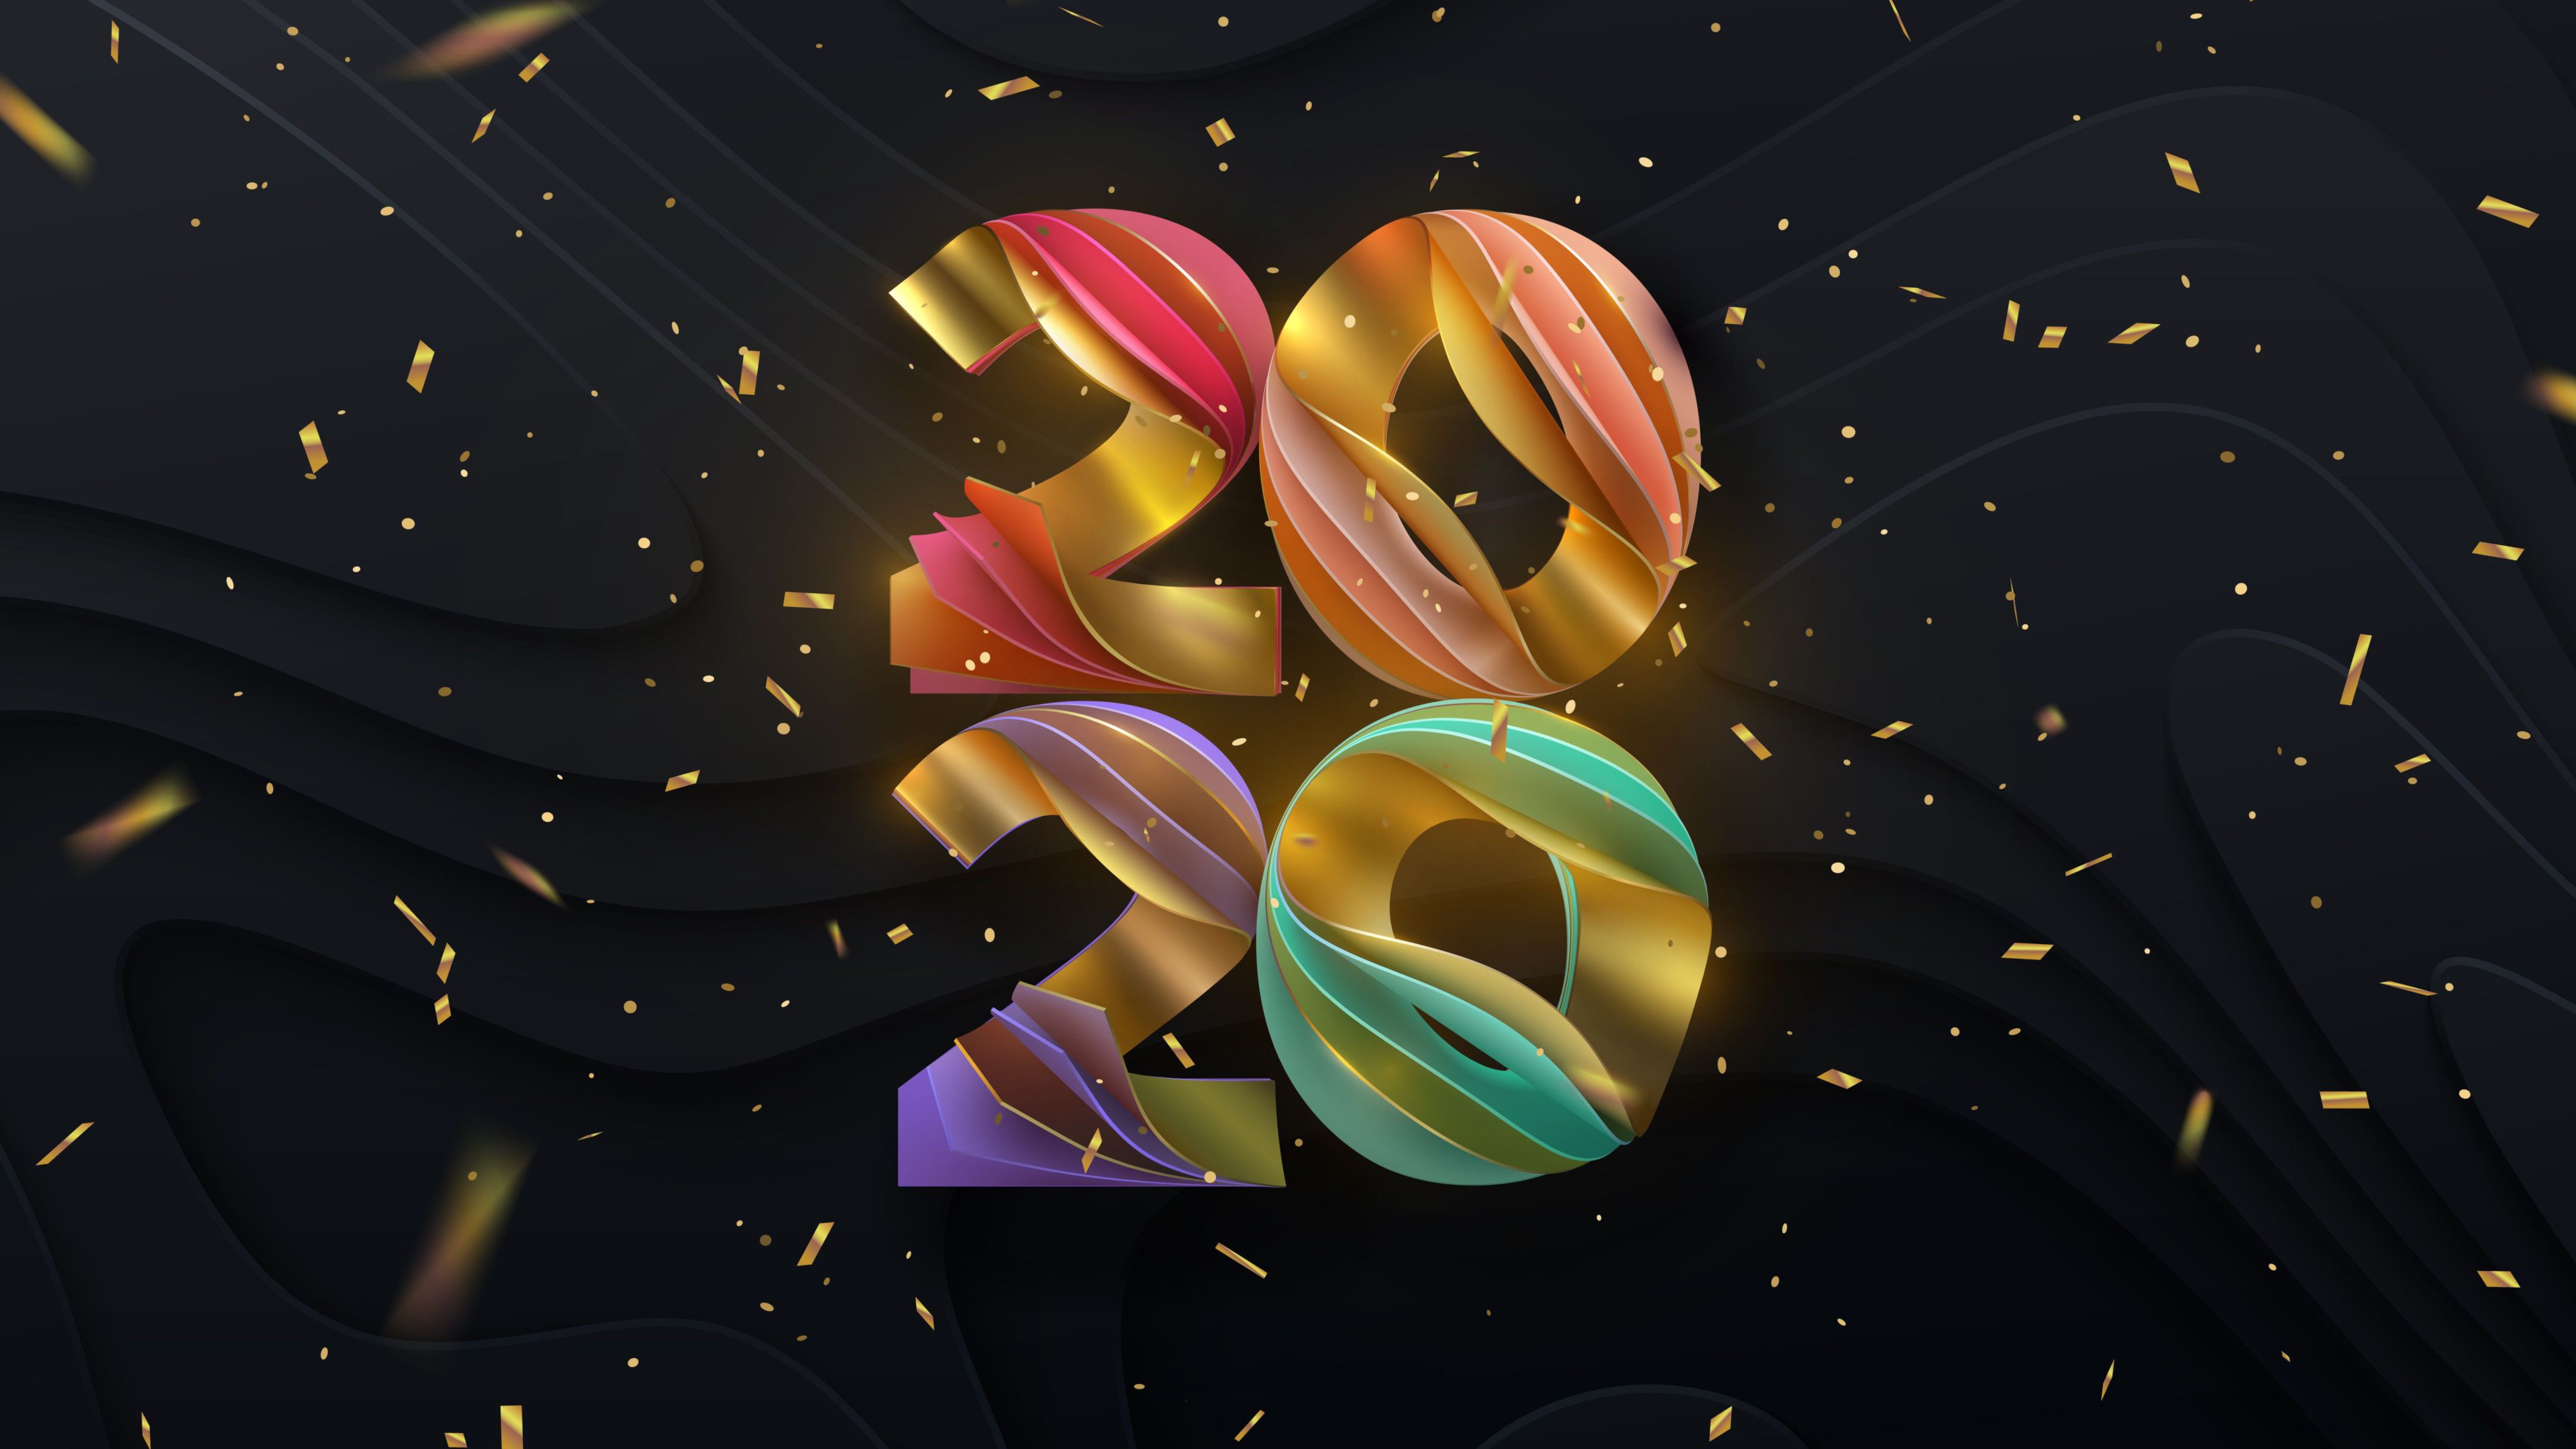 Colorful New Year 2020 iPhone XS MAX Wallpaper, HD Holidays 4K Wallpaper, Image, Photo and Background